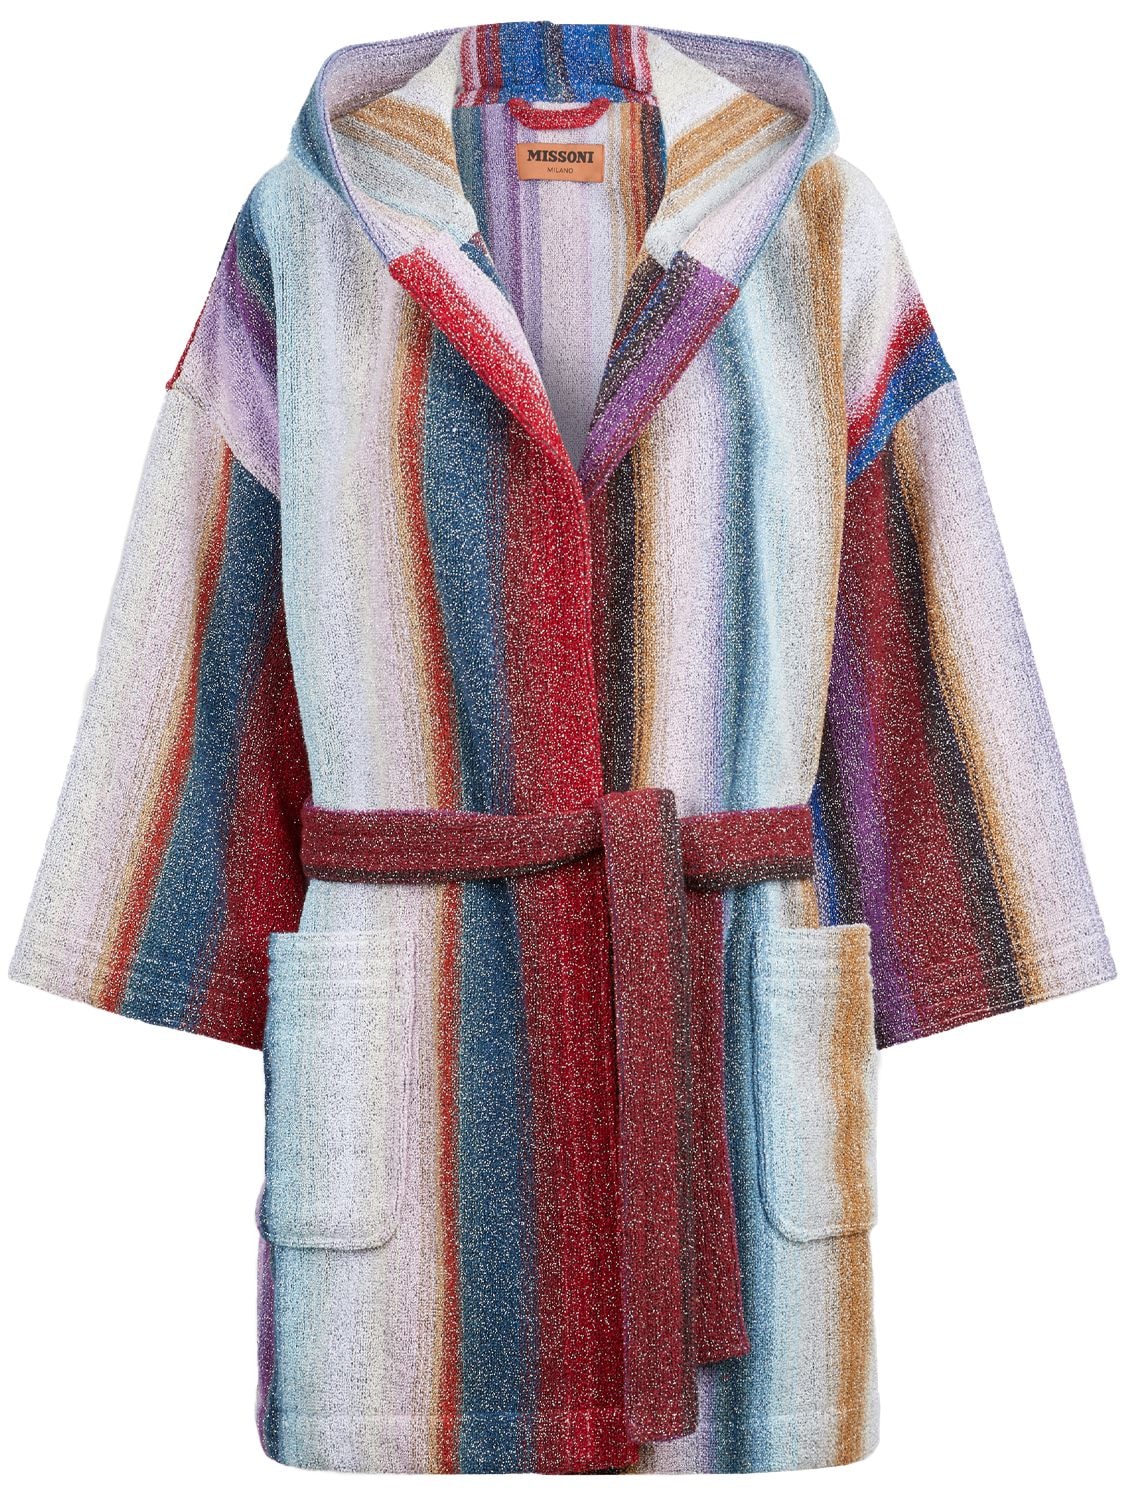 Missoni Home Collection Clancy Hooded Bathrobe In Blu Multicolor